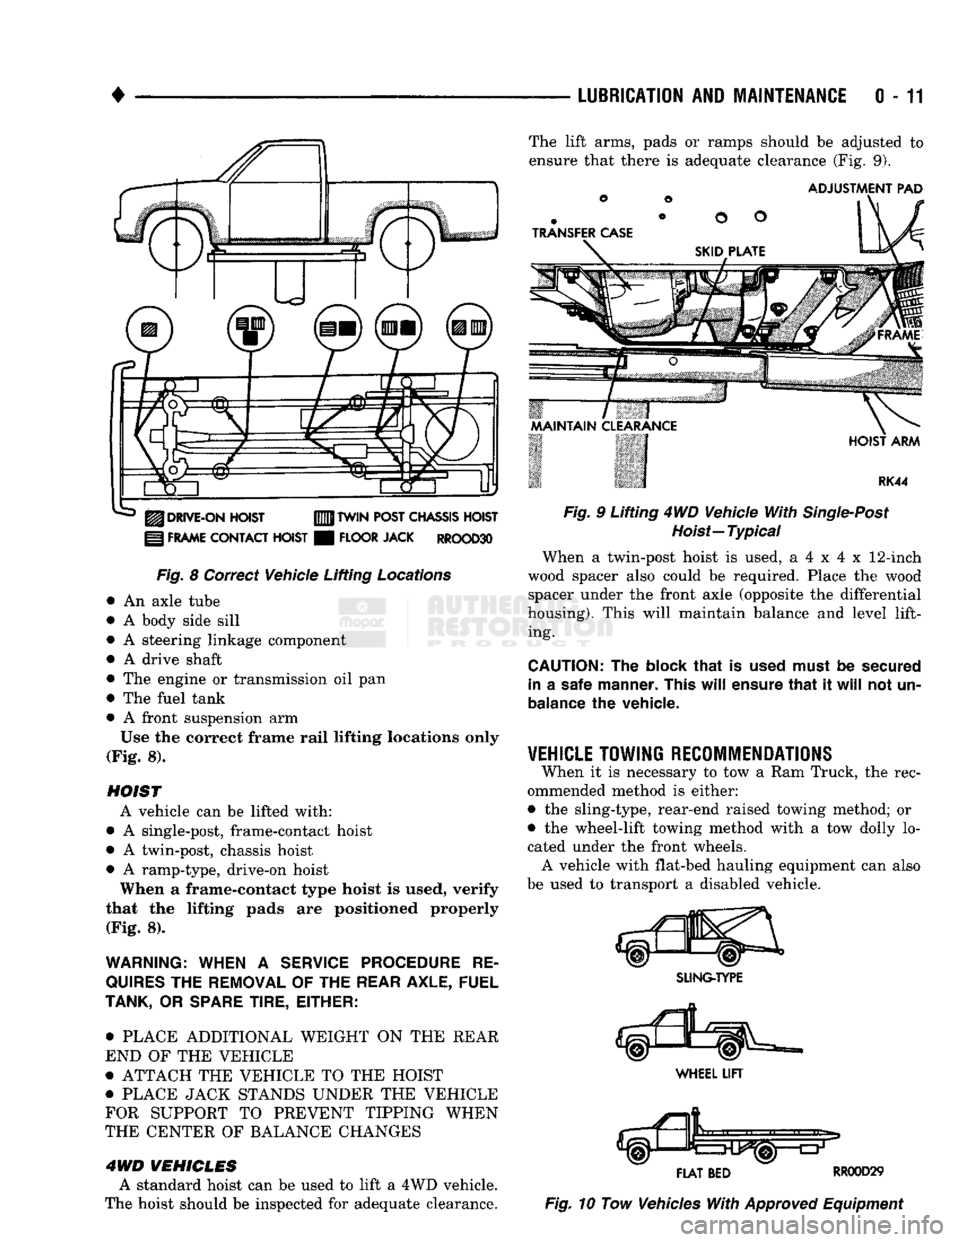 DODGE TRUCK 1993  Service Repair Manual 
LUBRICATION
 AND
 MAINTENANCE
 0-11 

J
 DRIVE-ON
 HOIST 

I
 FRAME
 CONTACT
 HOIST 
 TWIN
 POST
 CHASSIS
 HOIST 

FLOOR
 JACK
 RROOD30 
Fig.
 8 Correct Vehicle Lifting
 Locations 
 An axle tube 
A b